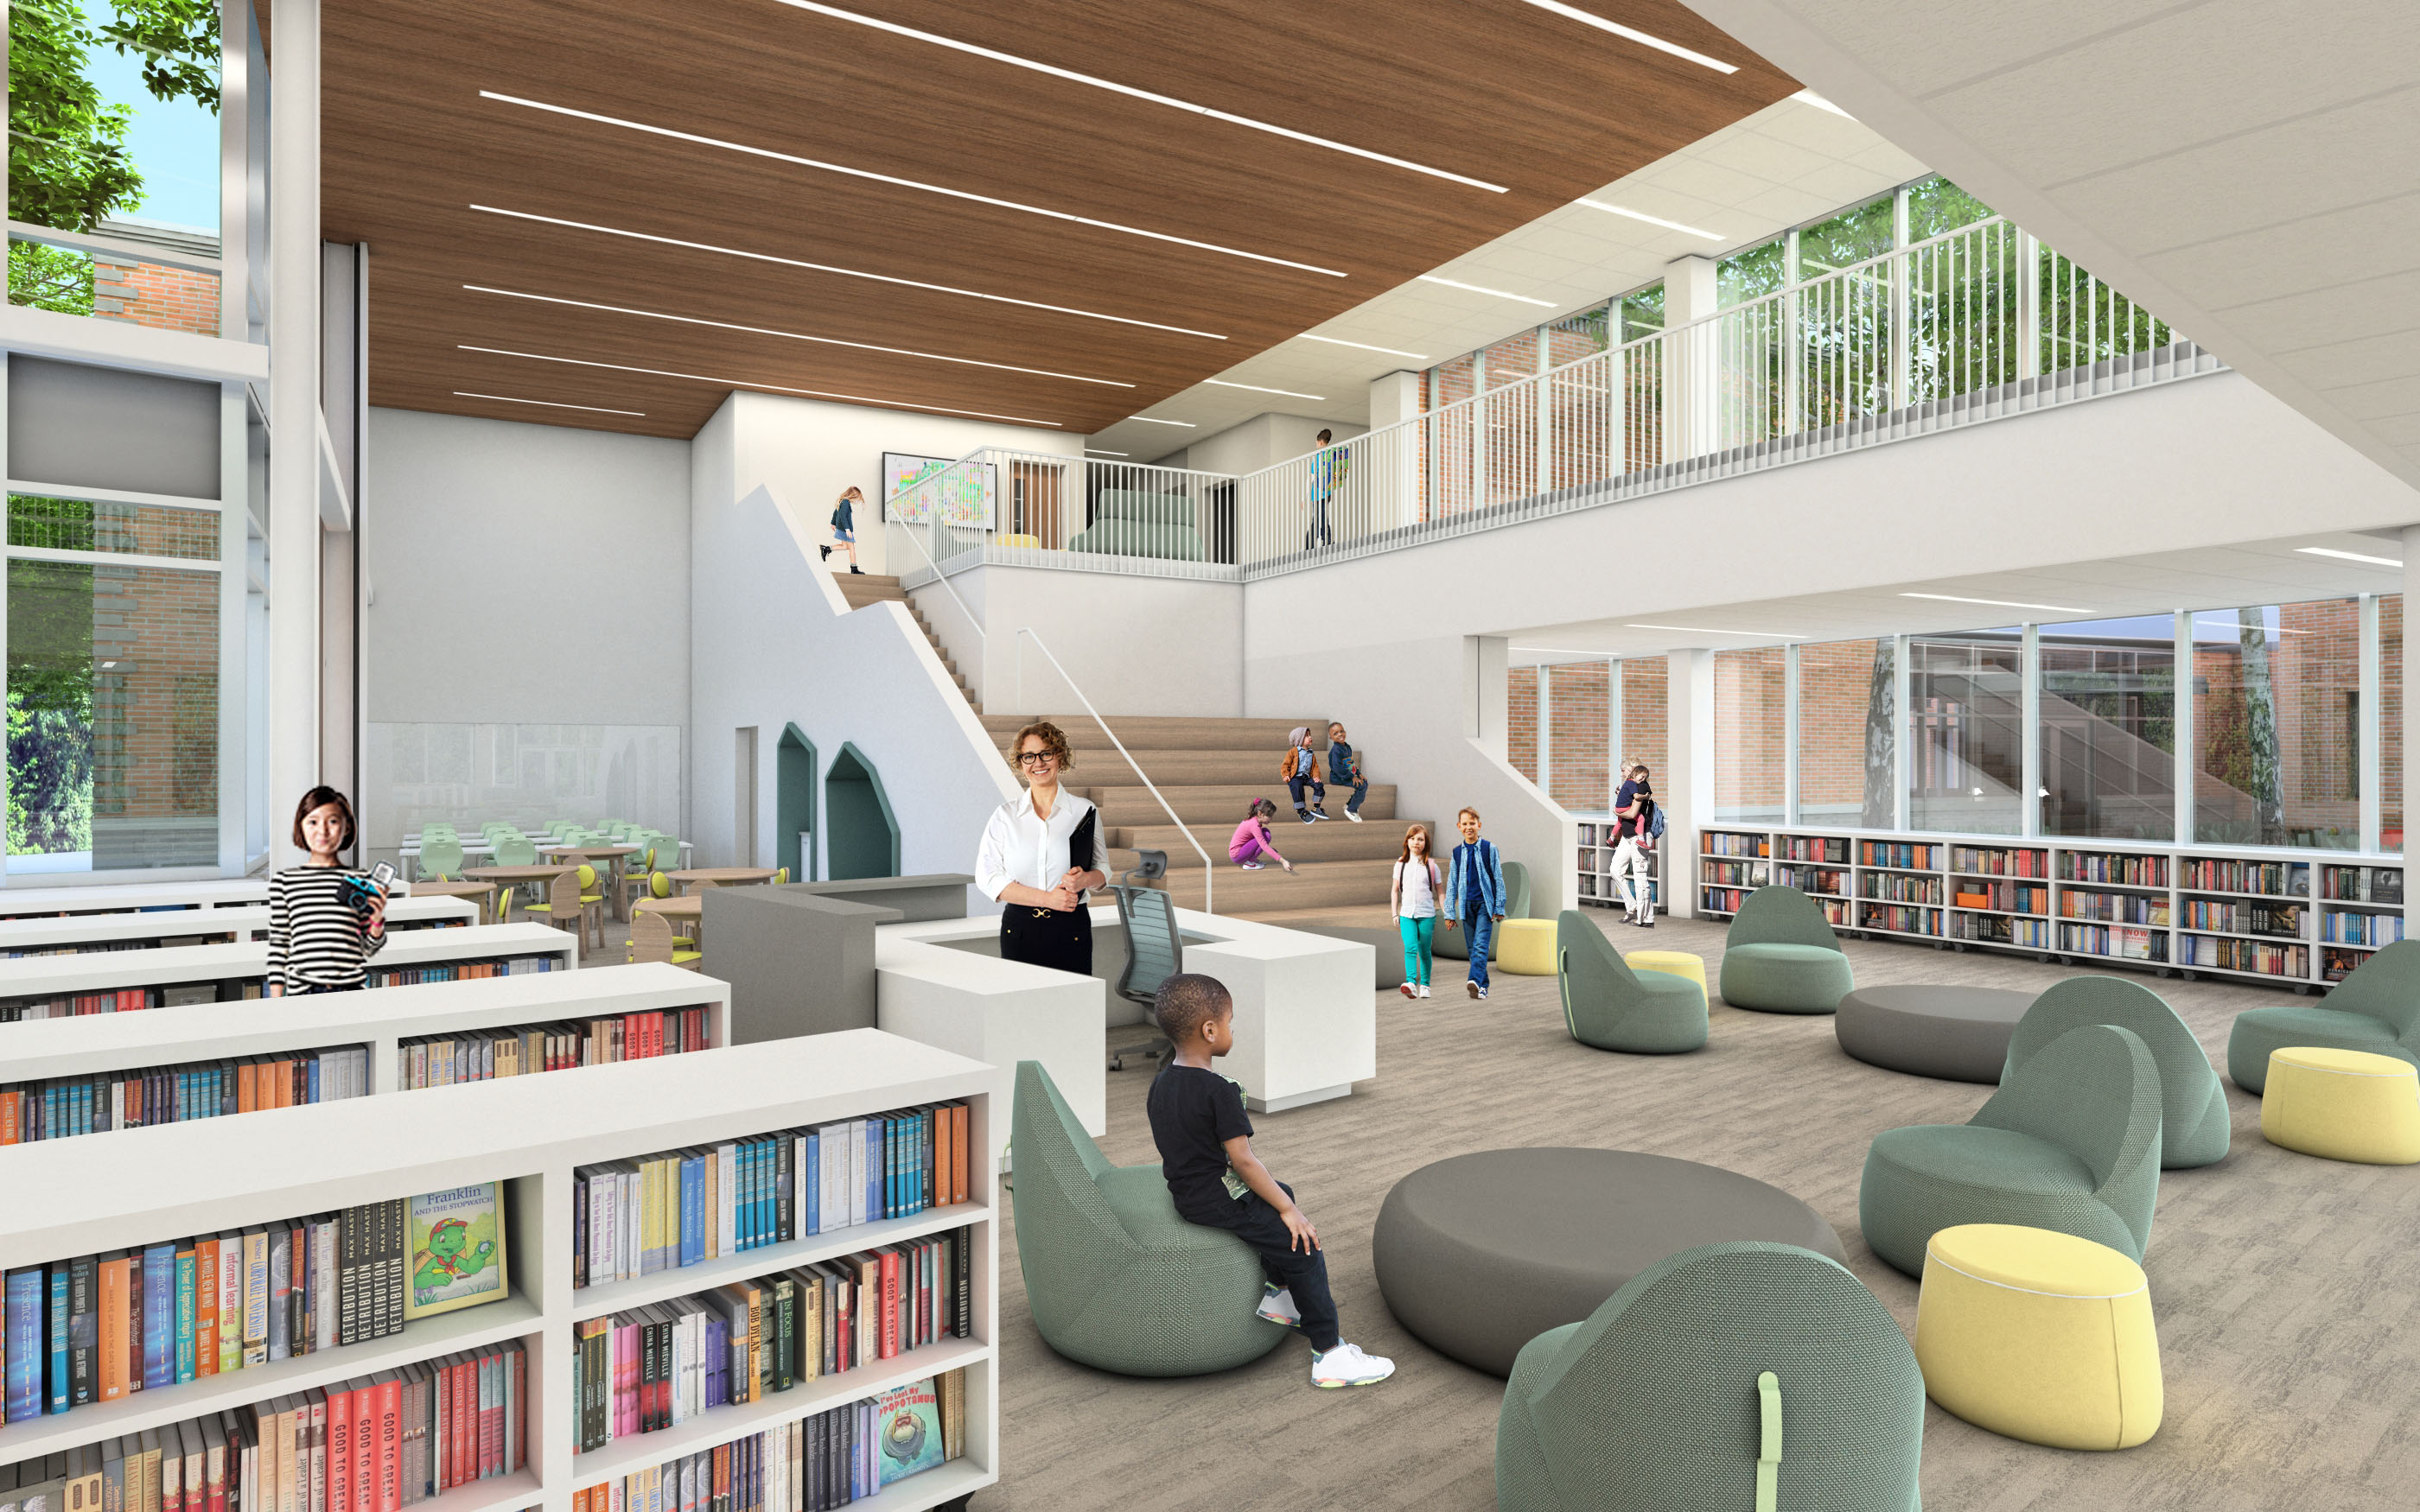 An interior rendering of the Barrington media center, with bookshelves, soft seating and a wide staircase going up to the second floor